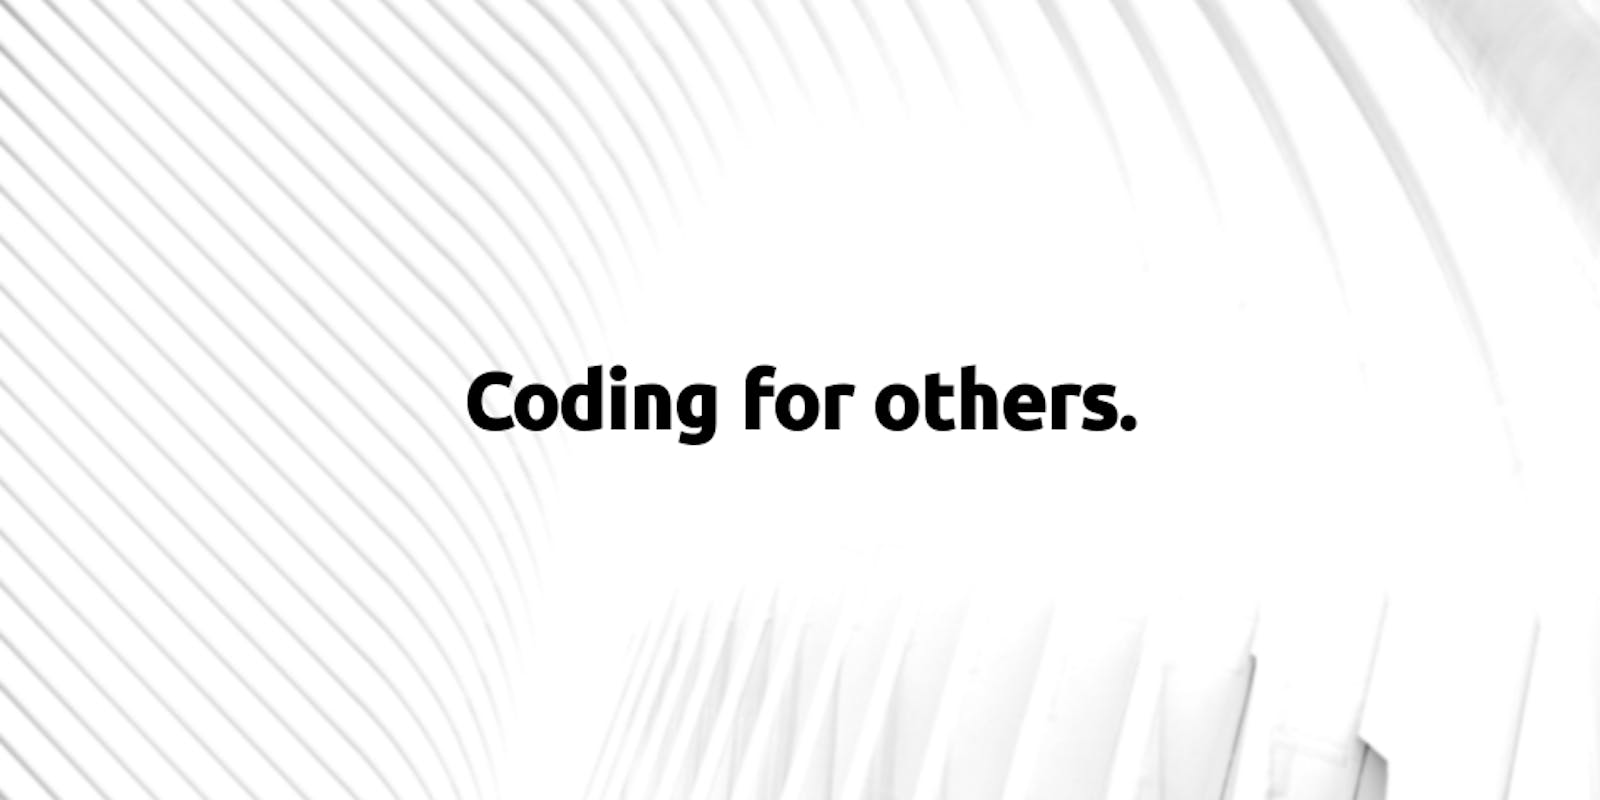 Writing code for others